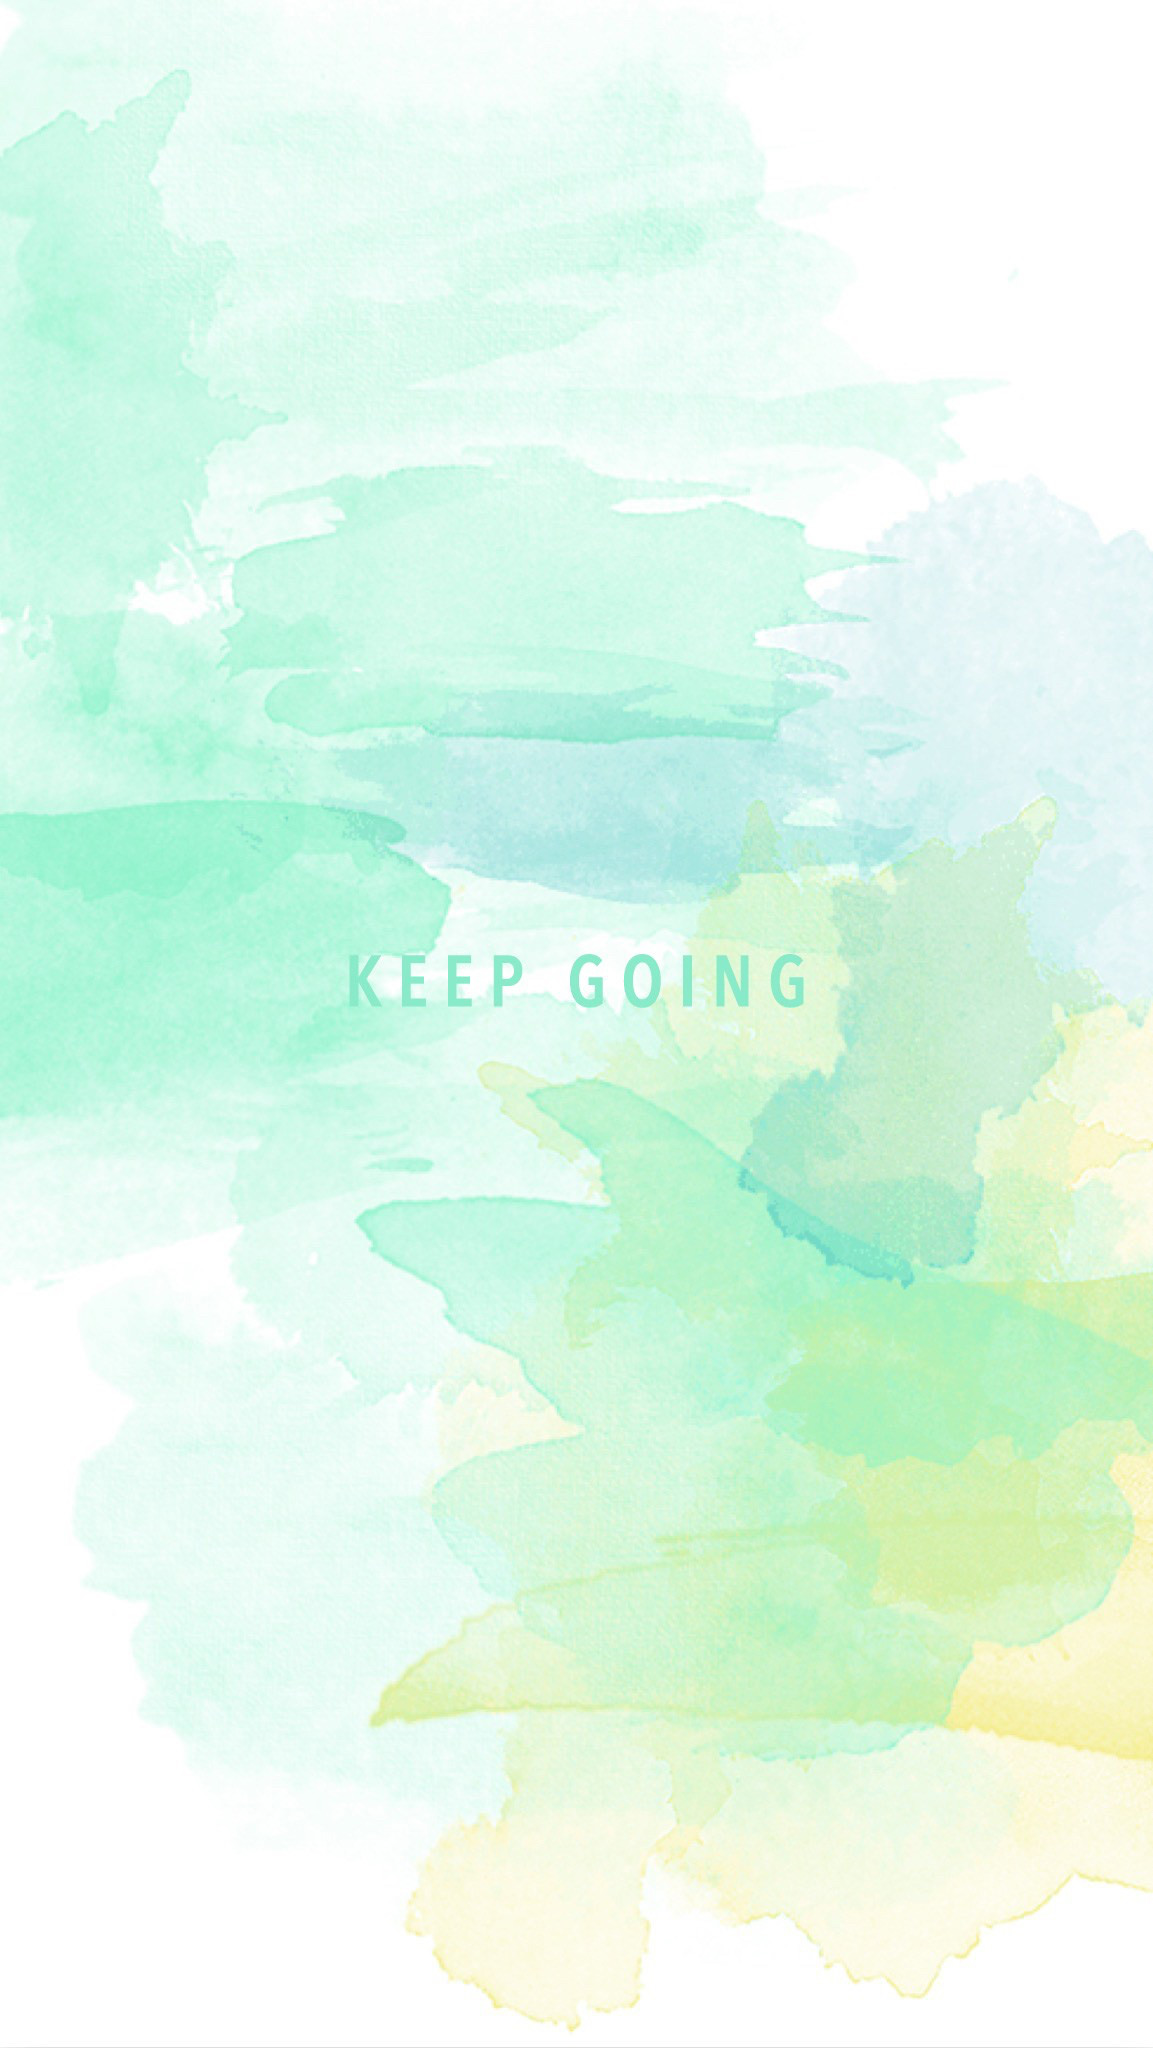 Mint green yellow watercolor Keep Going phone wallpaper phone background